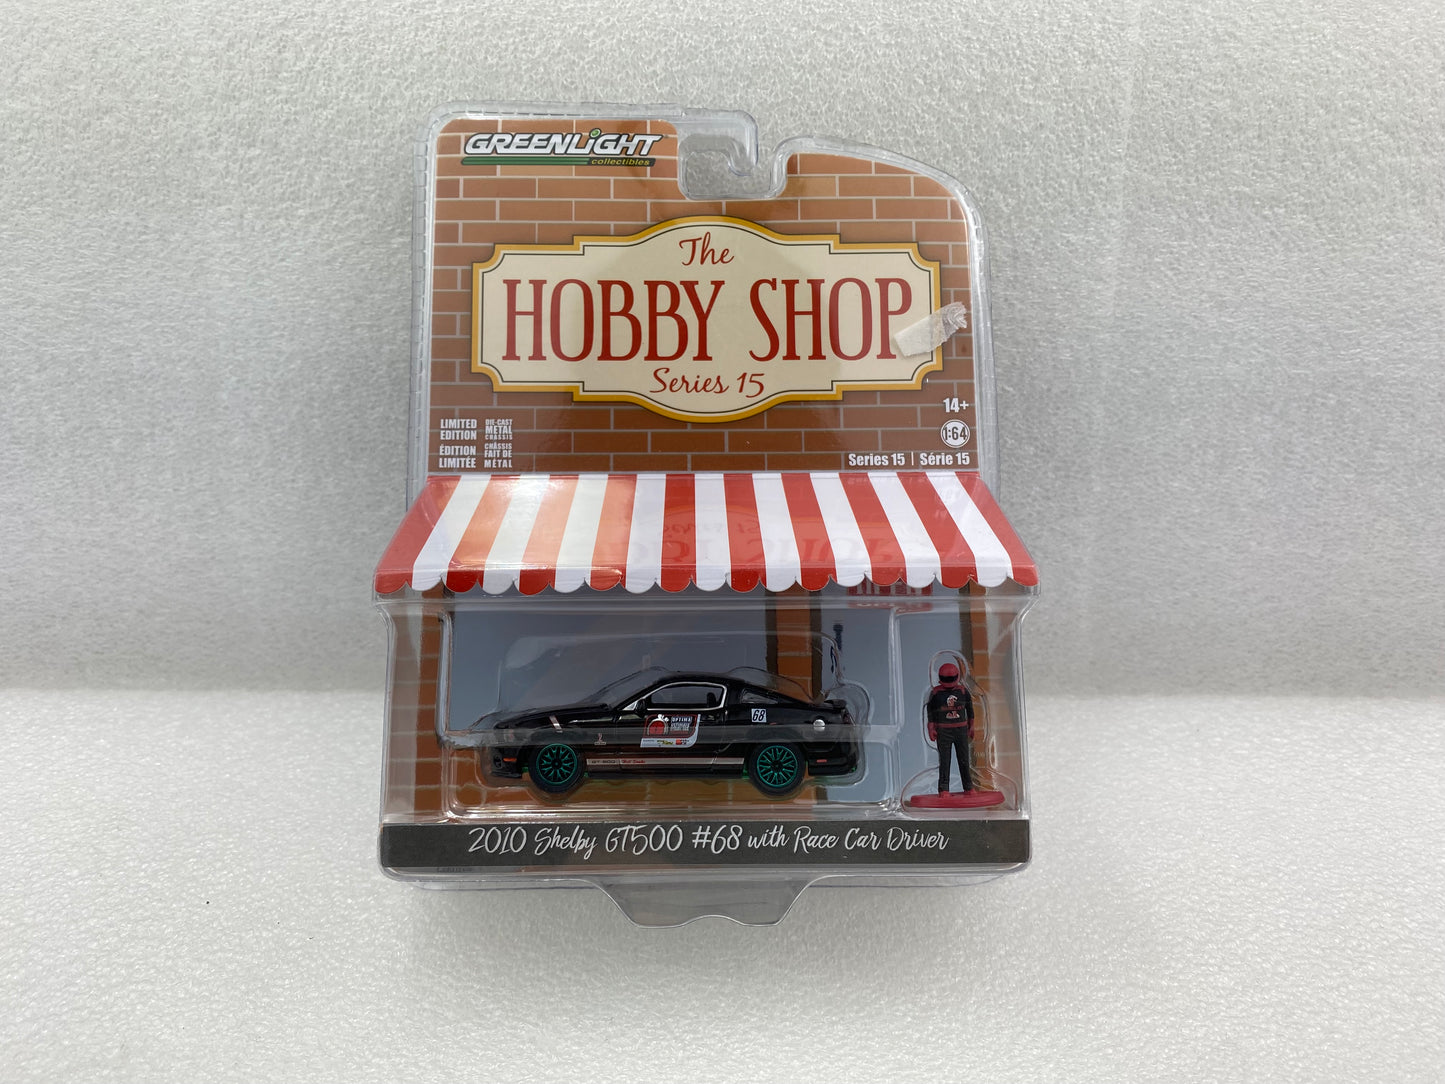 GreenLight Green Machine 1:64 The Hobby Shop Series 15 - 2010 Ford Shelby GT500 #68 - OPTIMA Ultimate Street Car Invitational with Race Car Driver 97150-E